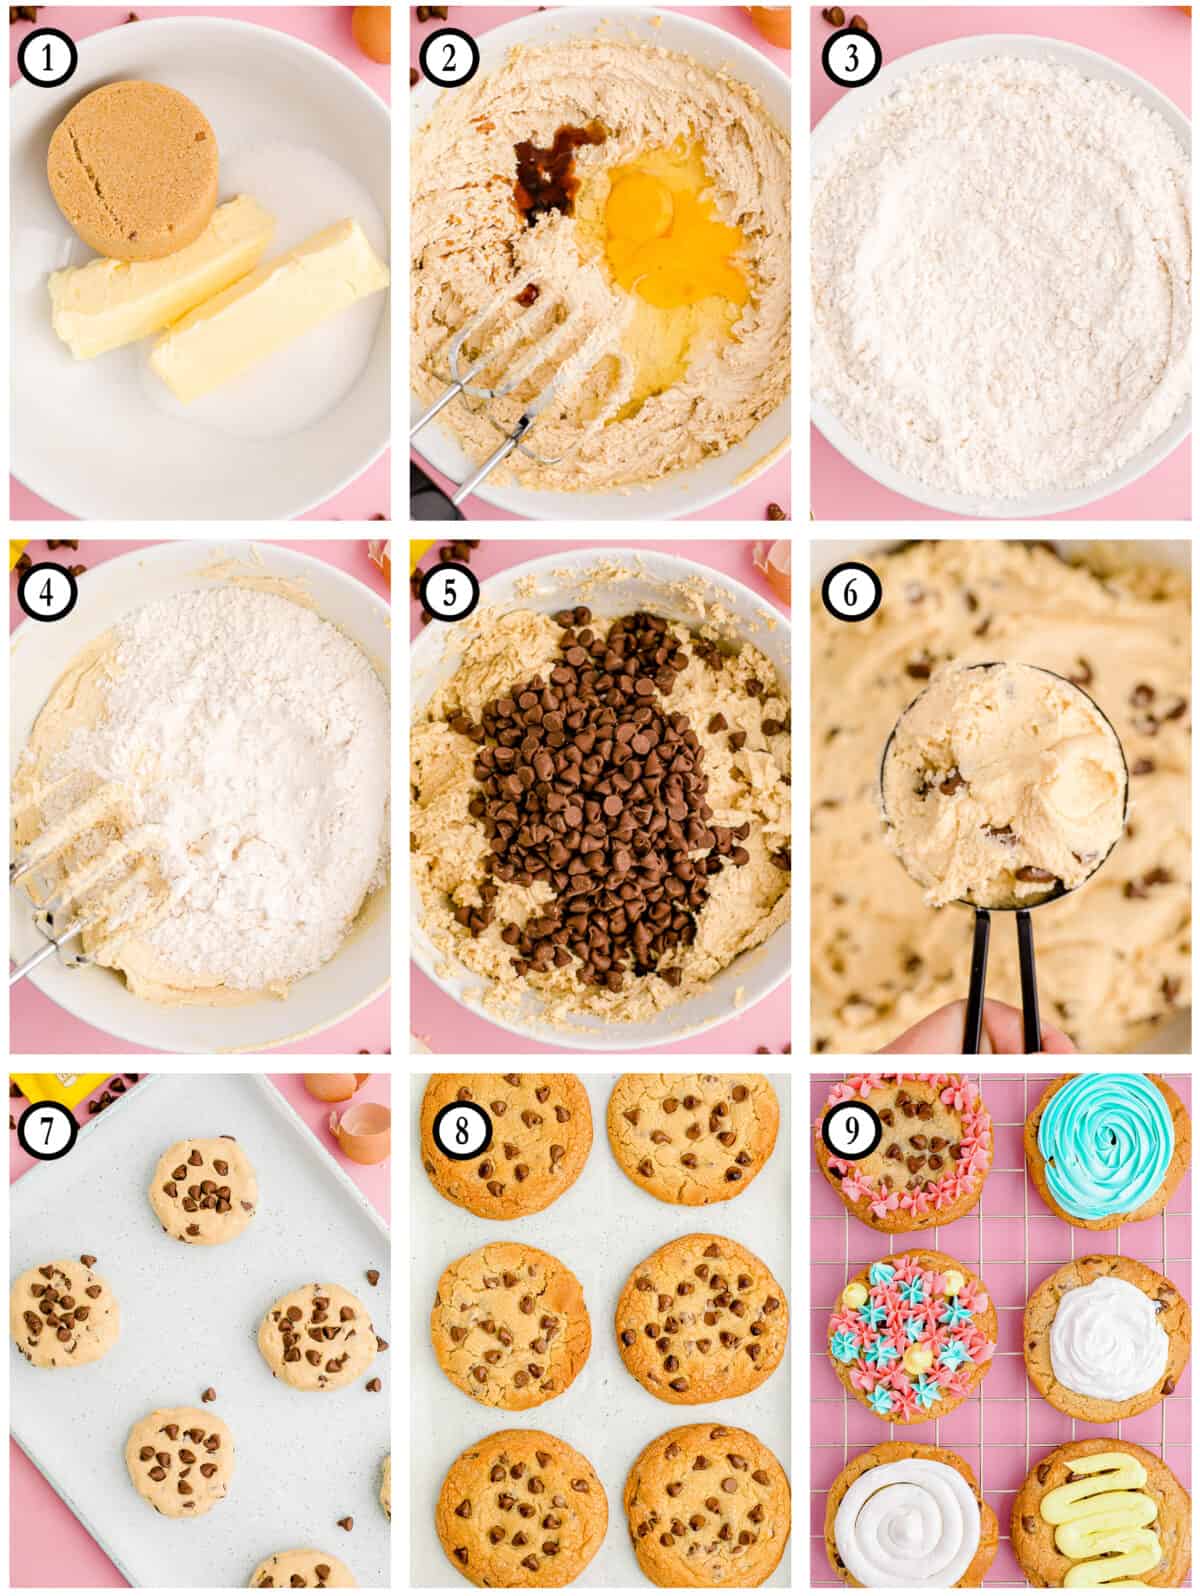 step by step photos showing how to make crumbl cookies